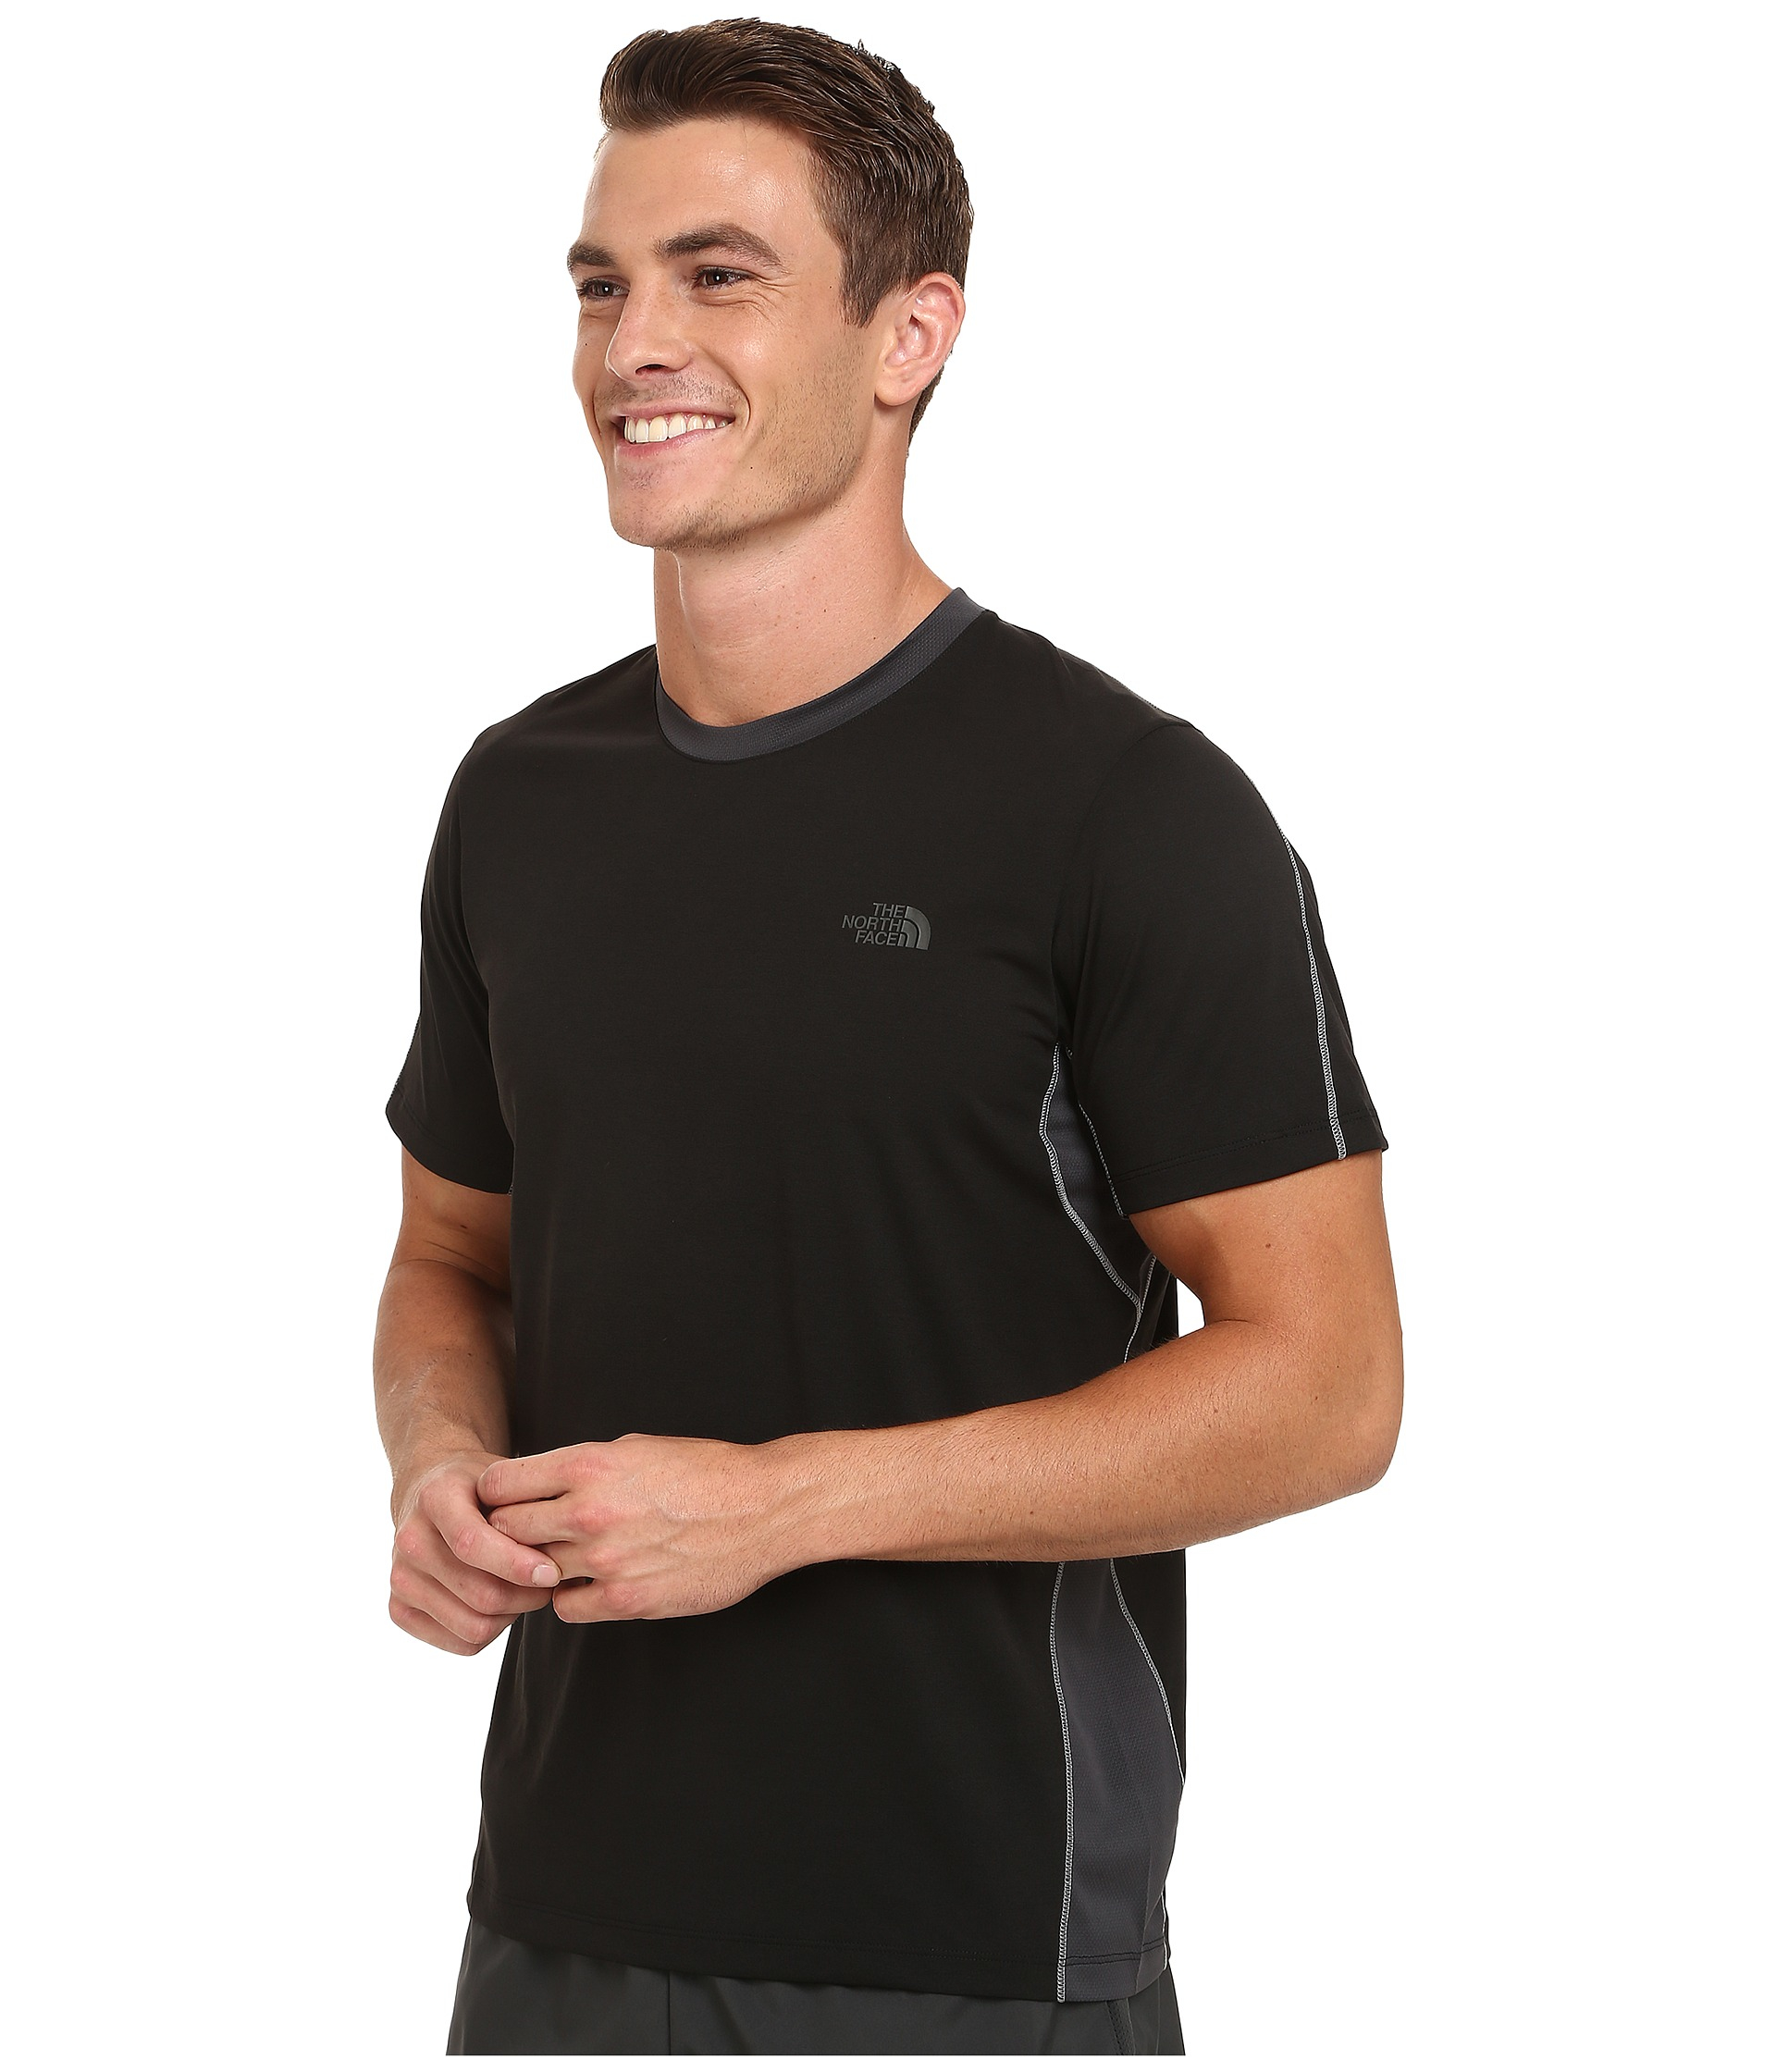 The North Face Ampere Short Sleeve Crew Shirt in Black for Men - Lyst